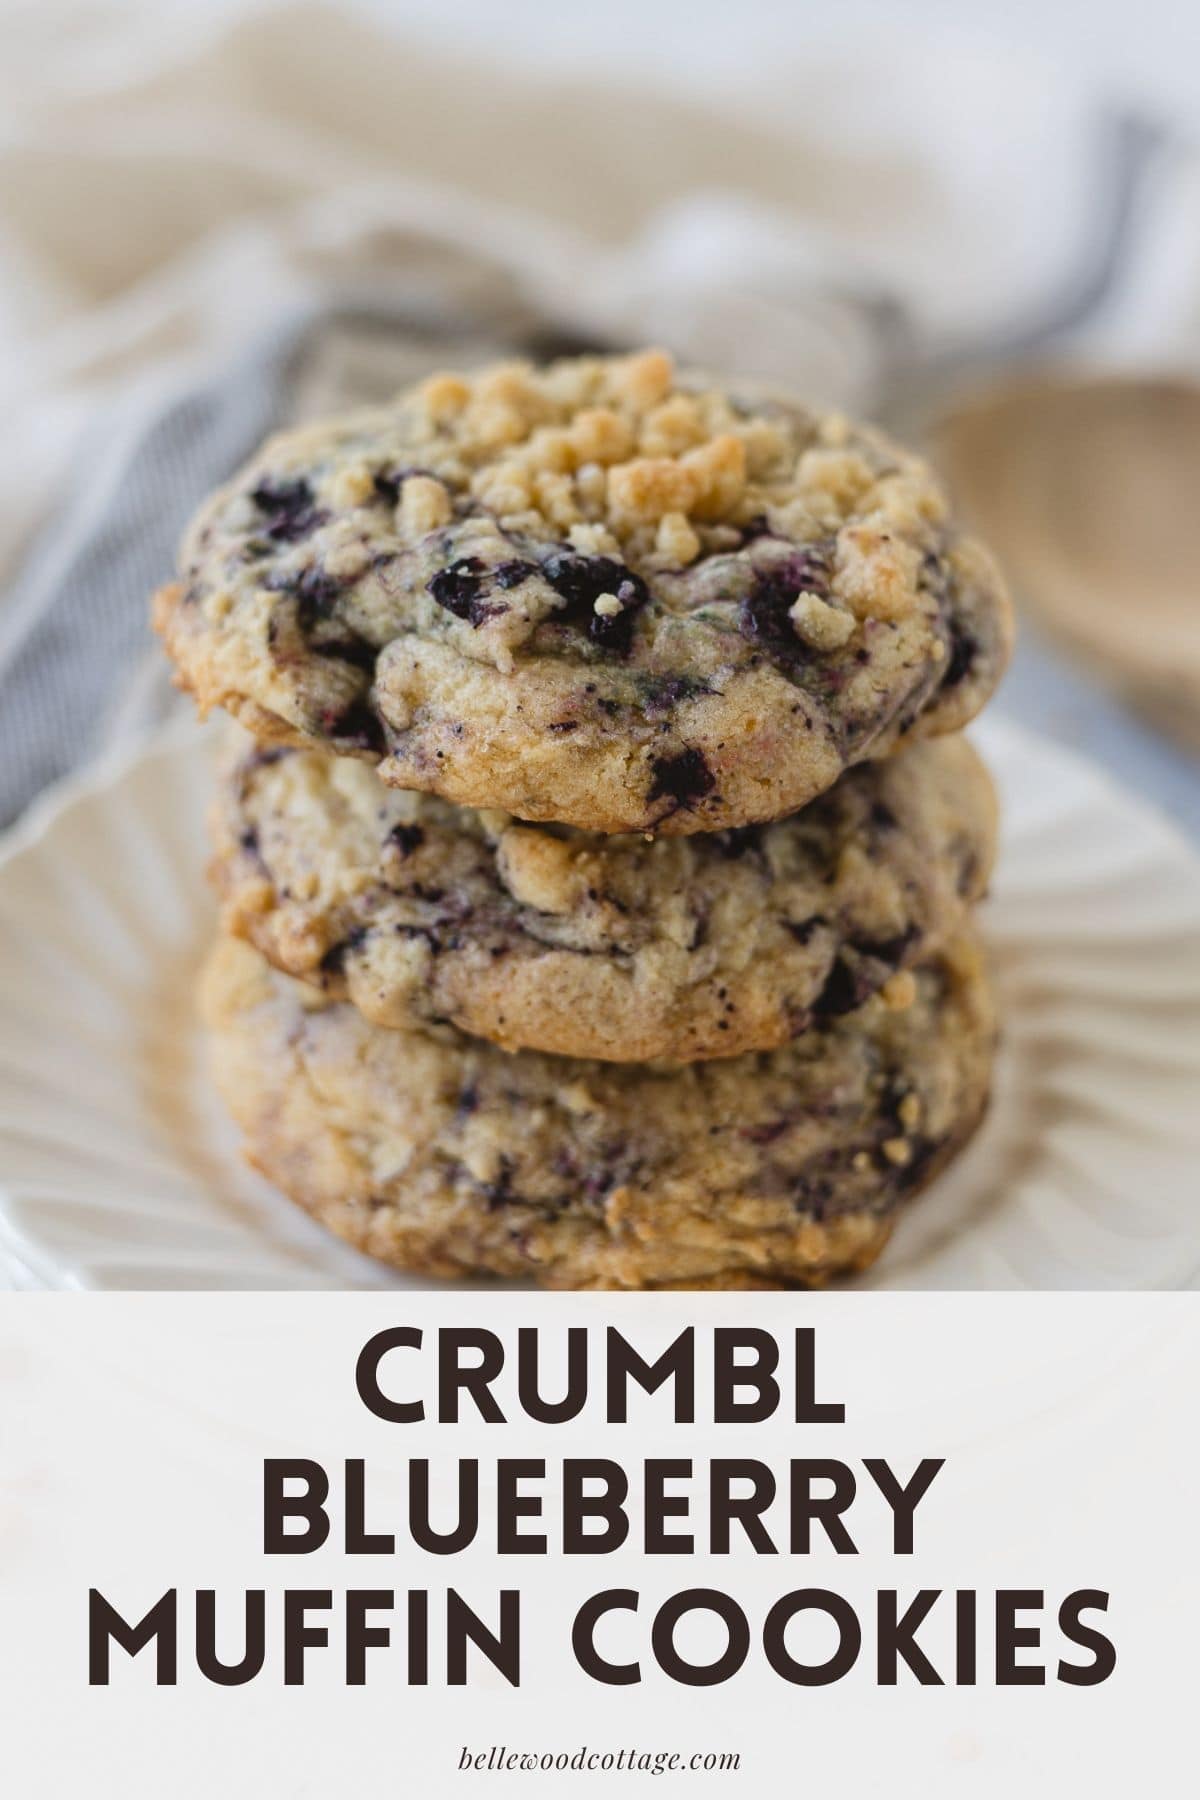 Blueberry Muffin Cookies with the words, "Crumbl Blueberry Muffin Cookies".